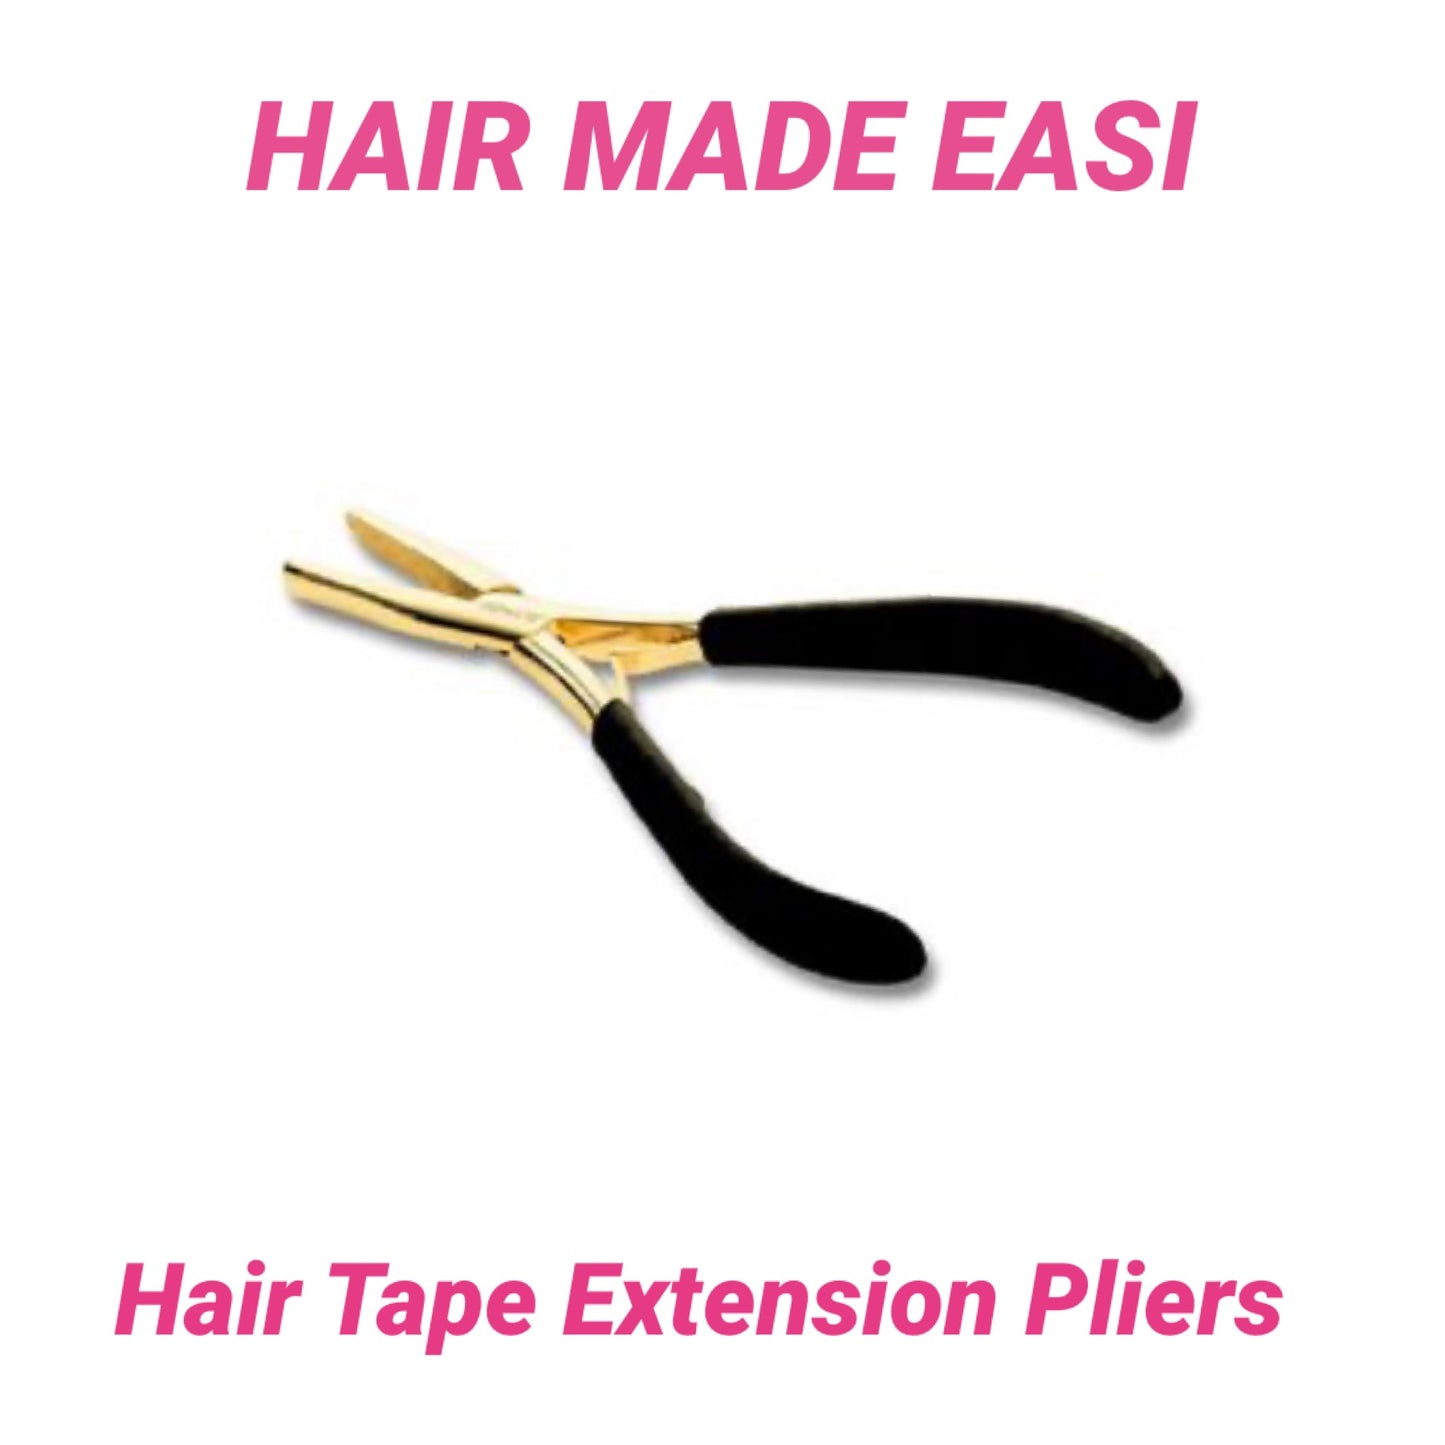 Hair Made Easi Tape Extension Pliers